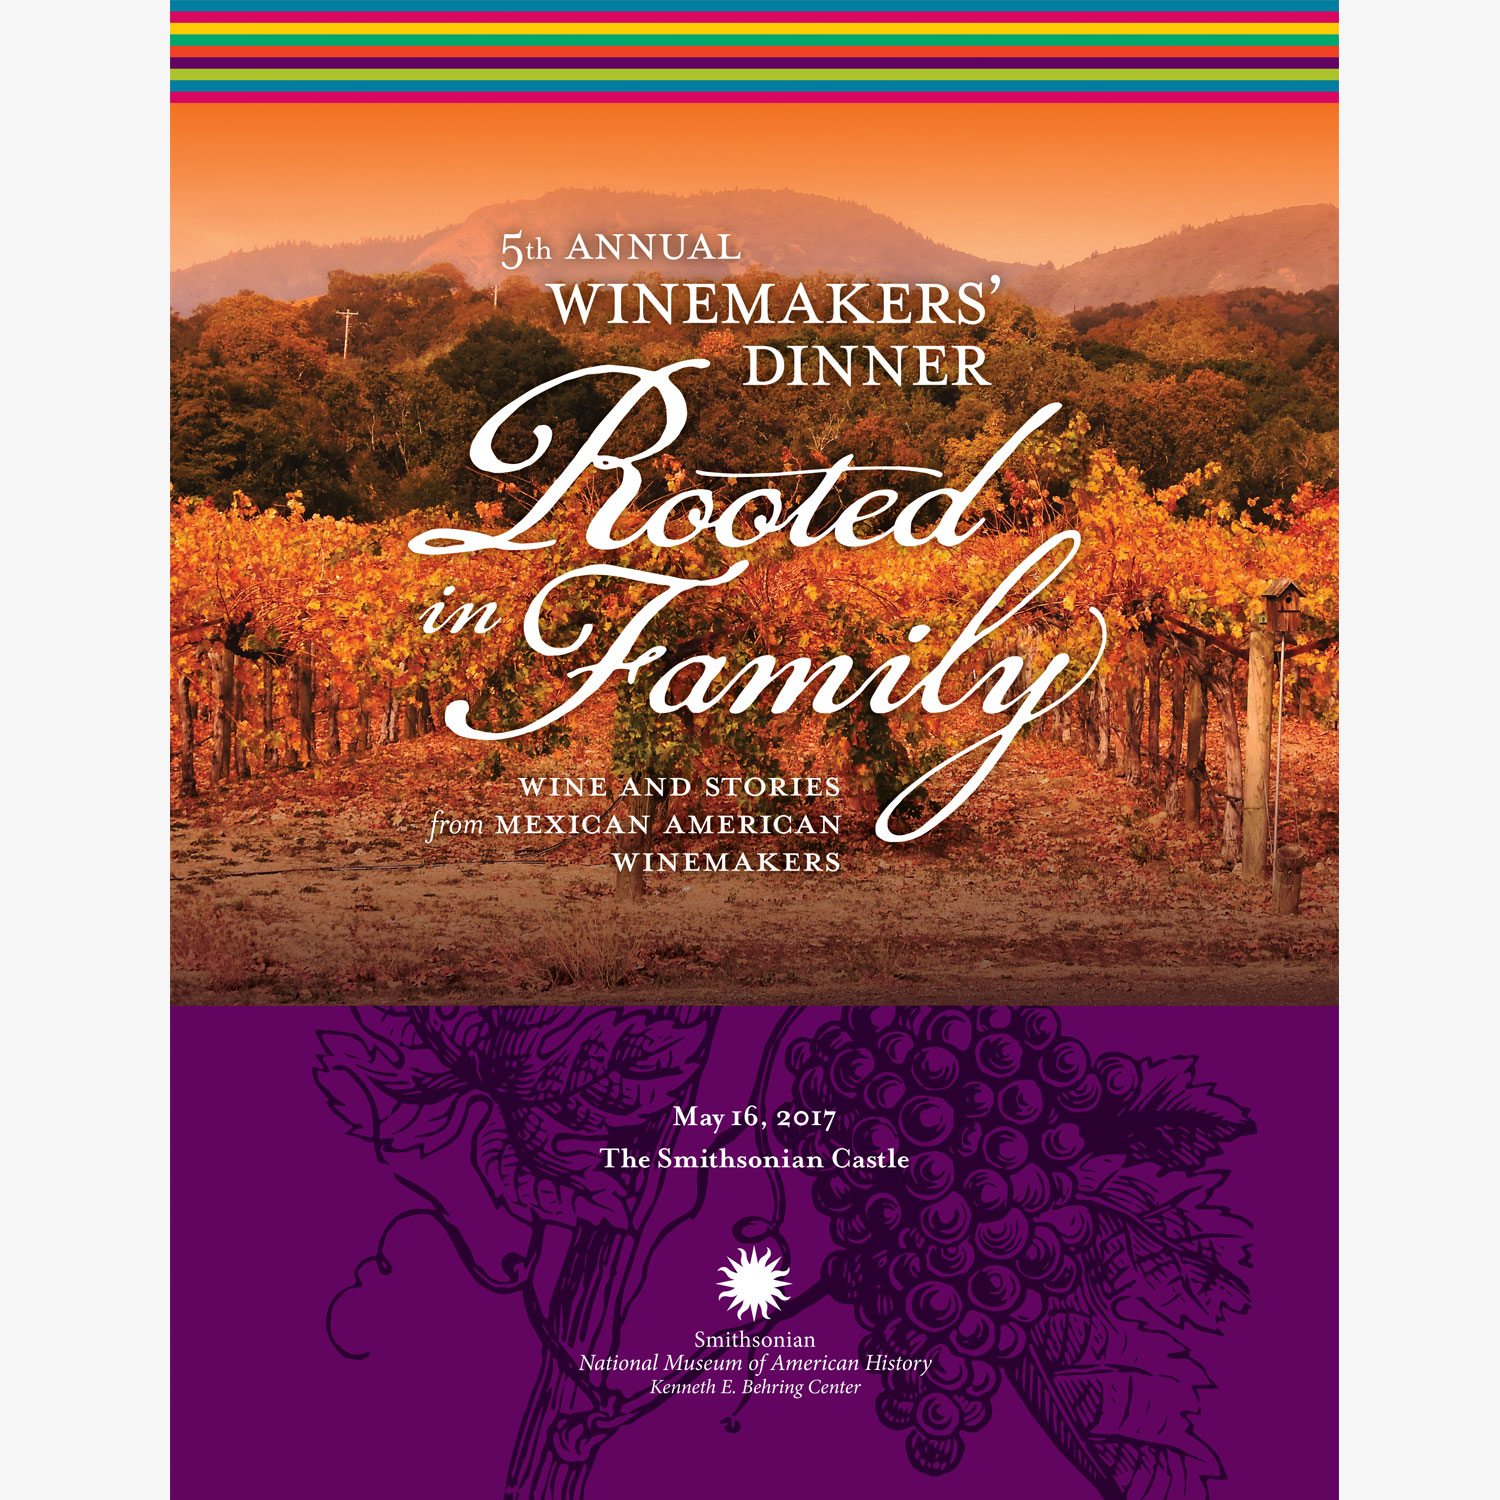  Annual Winemakers’ Dinner Event Materials 